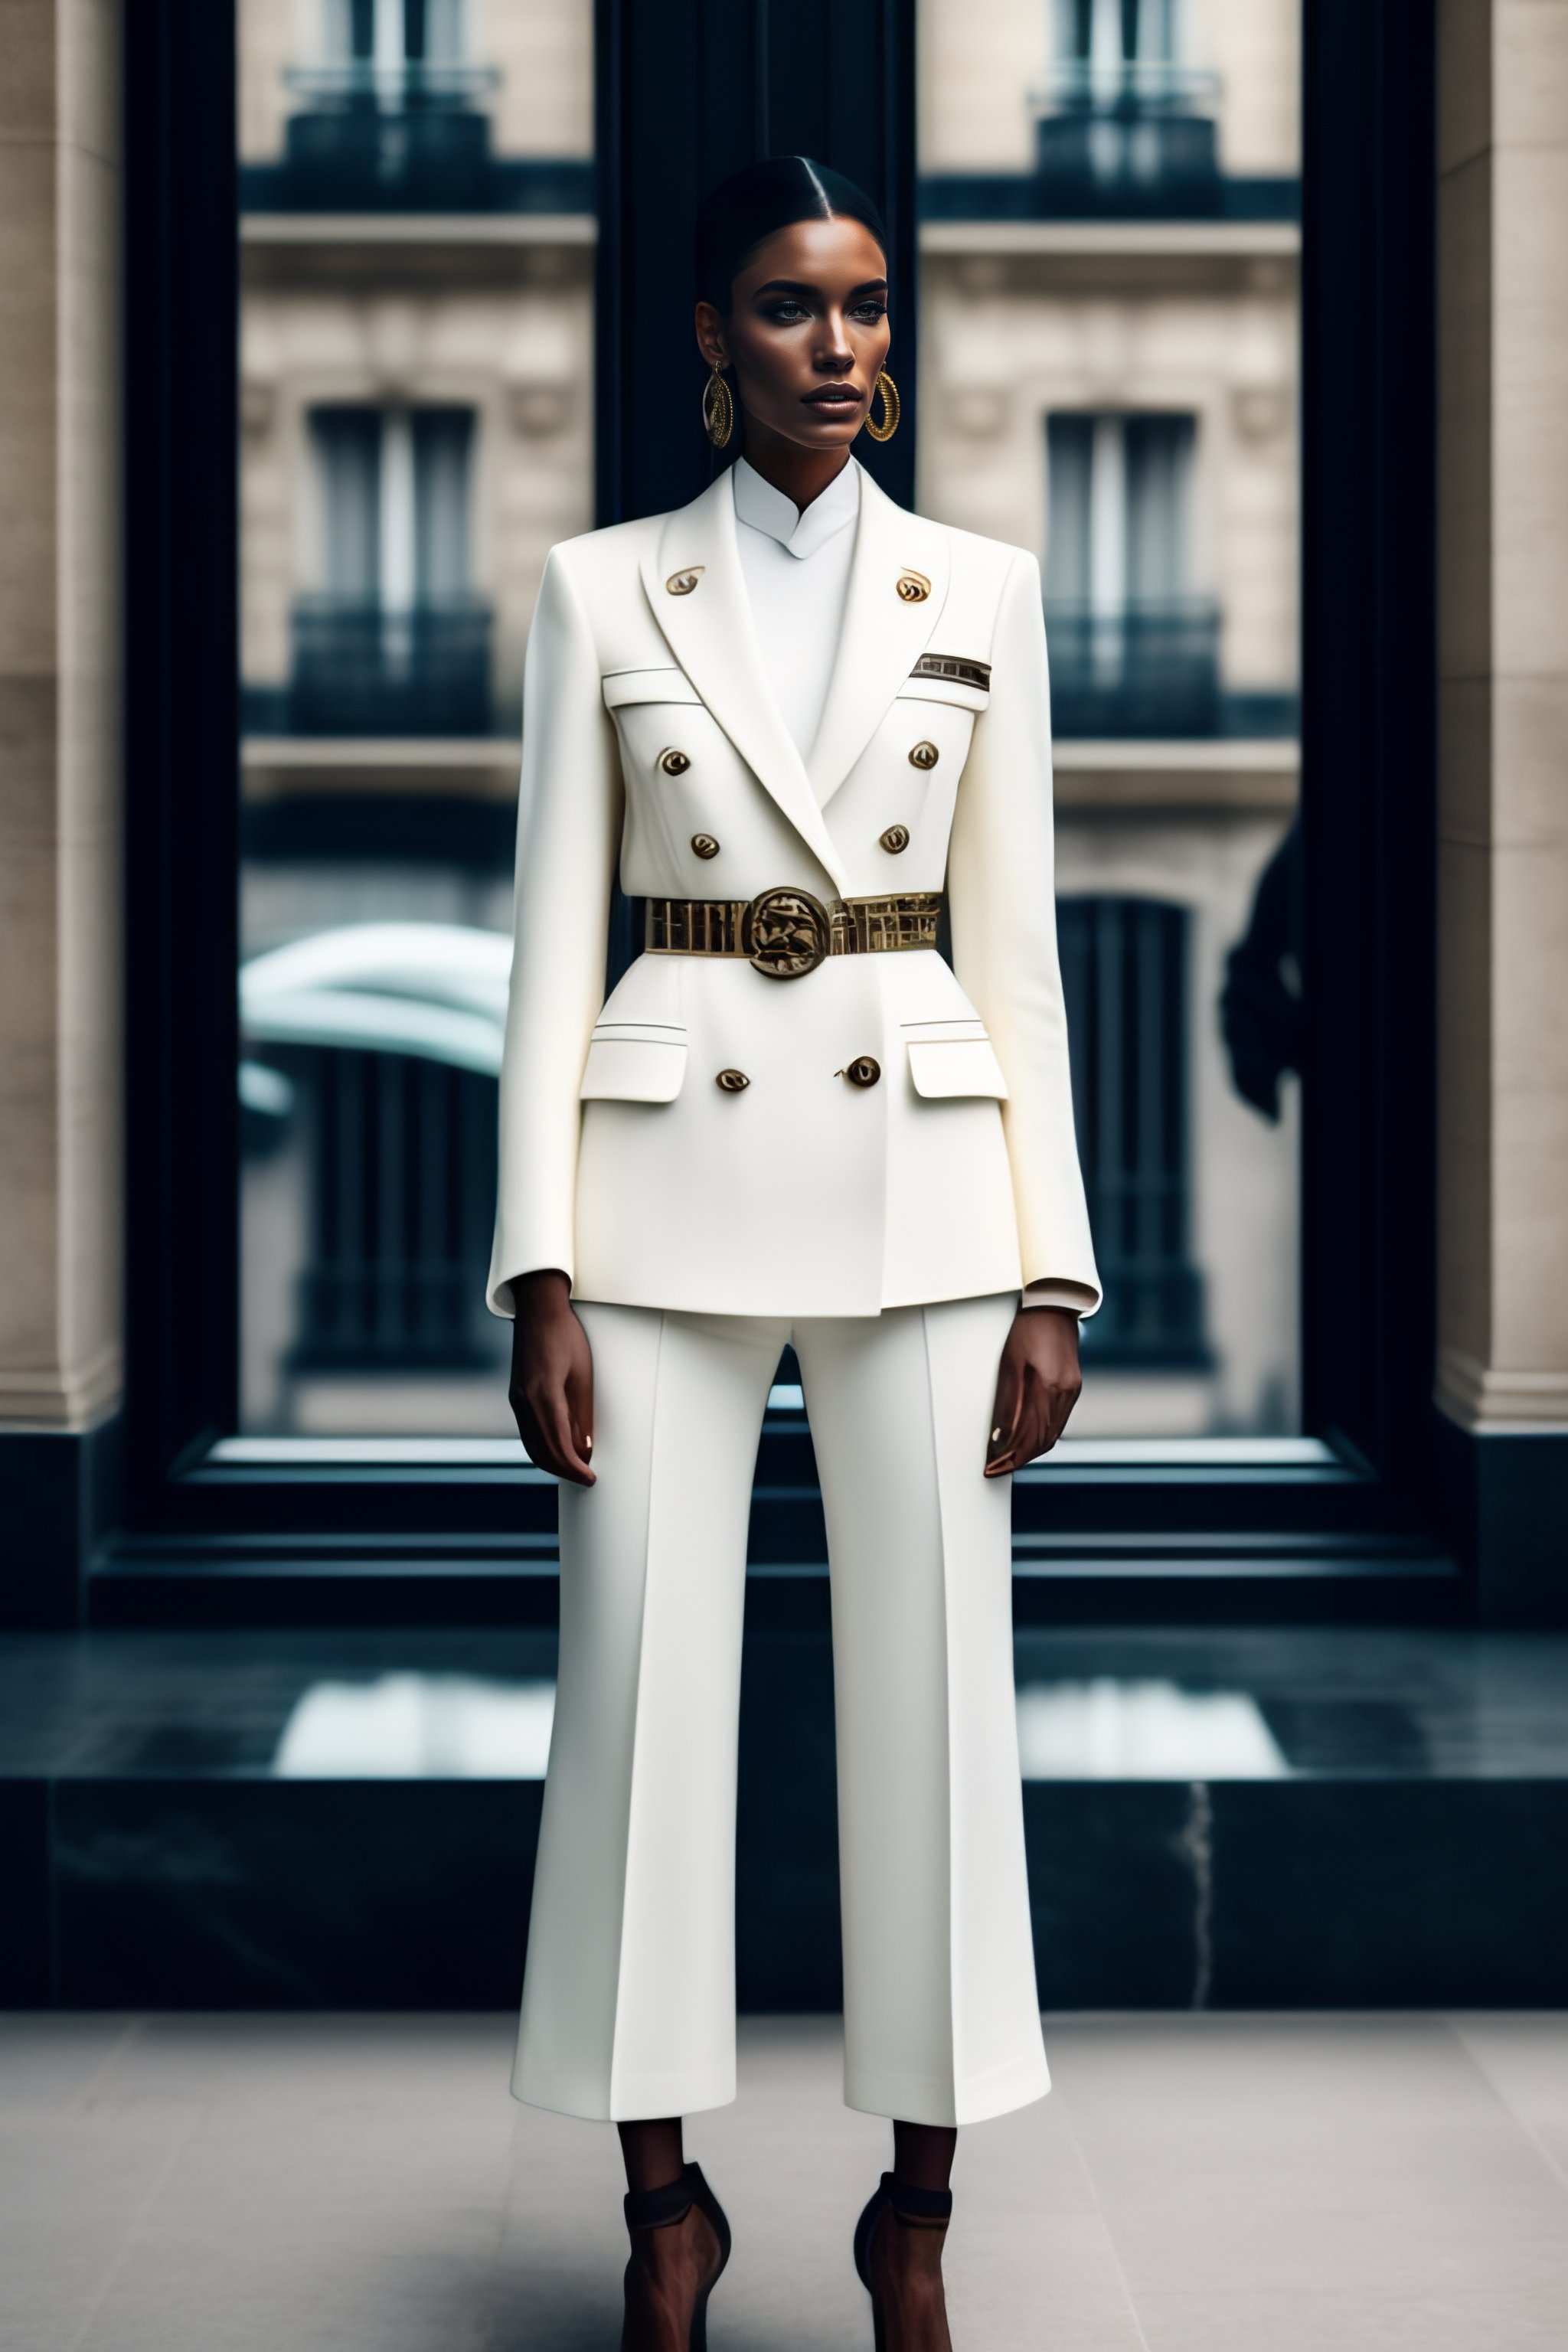 Lexica - An editorial fashion photograph in which a white female model  wears Chanel suit, standing next to a window, in Paris